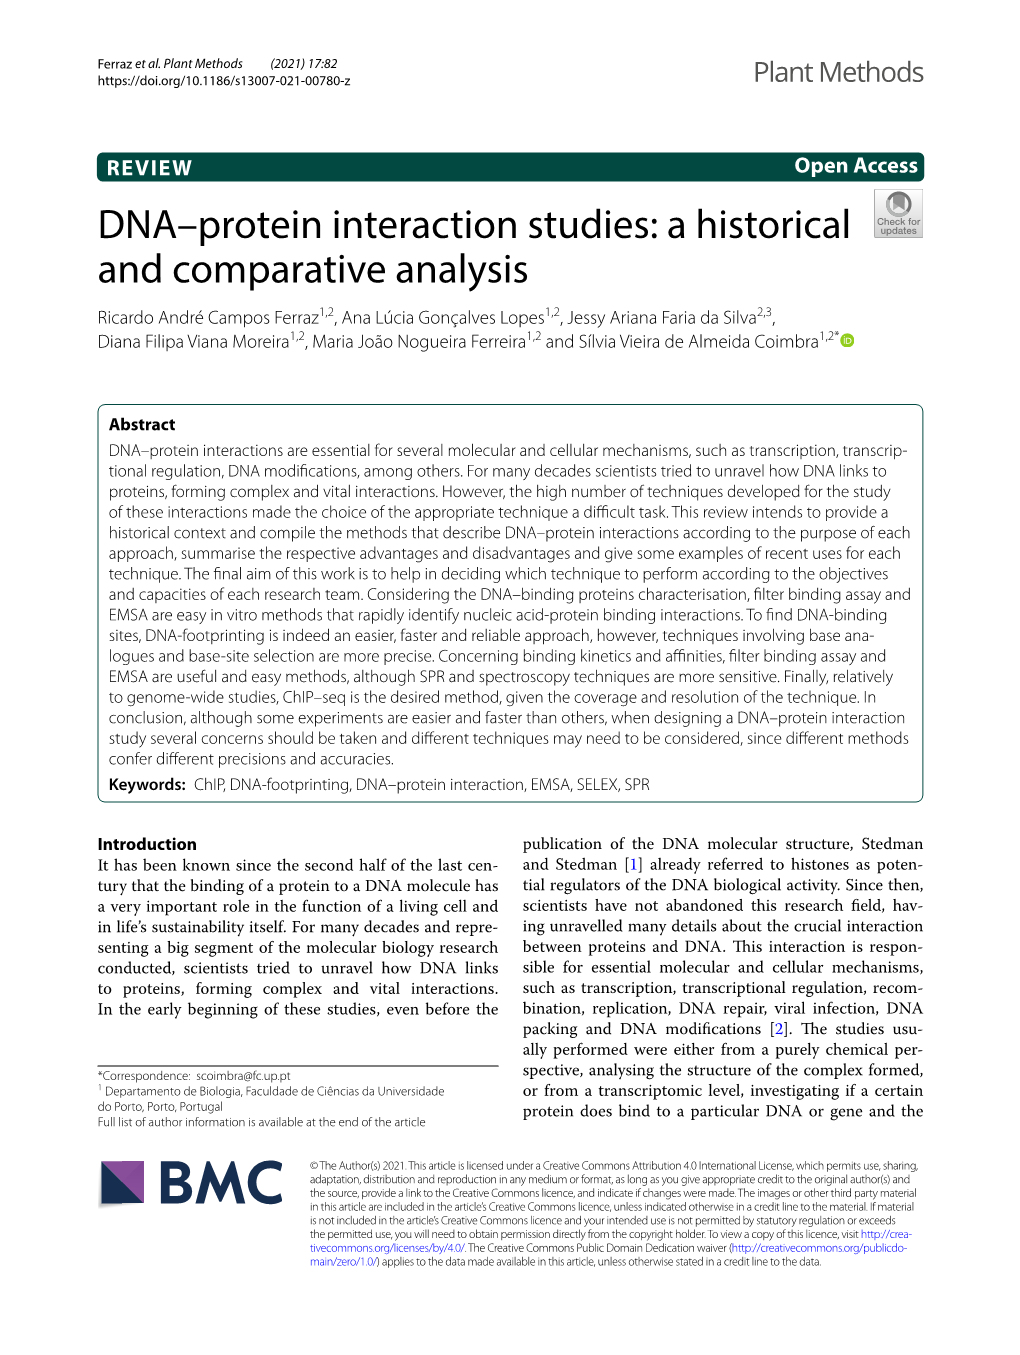 DNA–Protein Interaction Studies: a Historical and Comparative Analysis